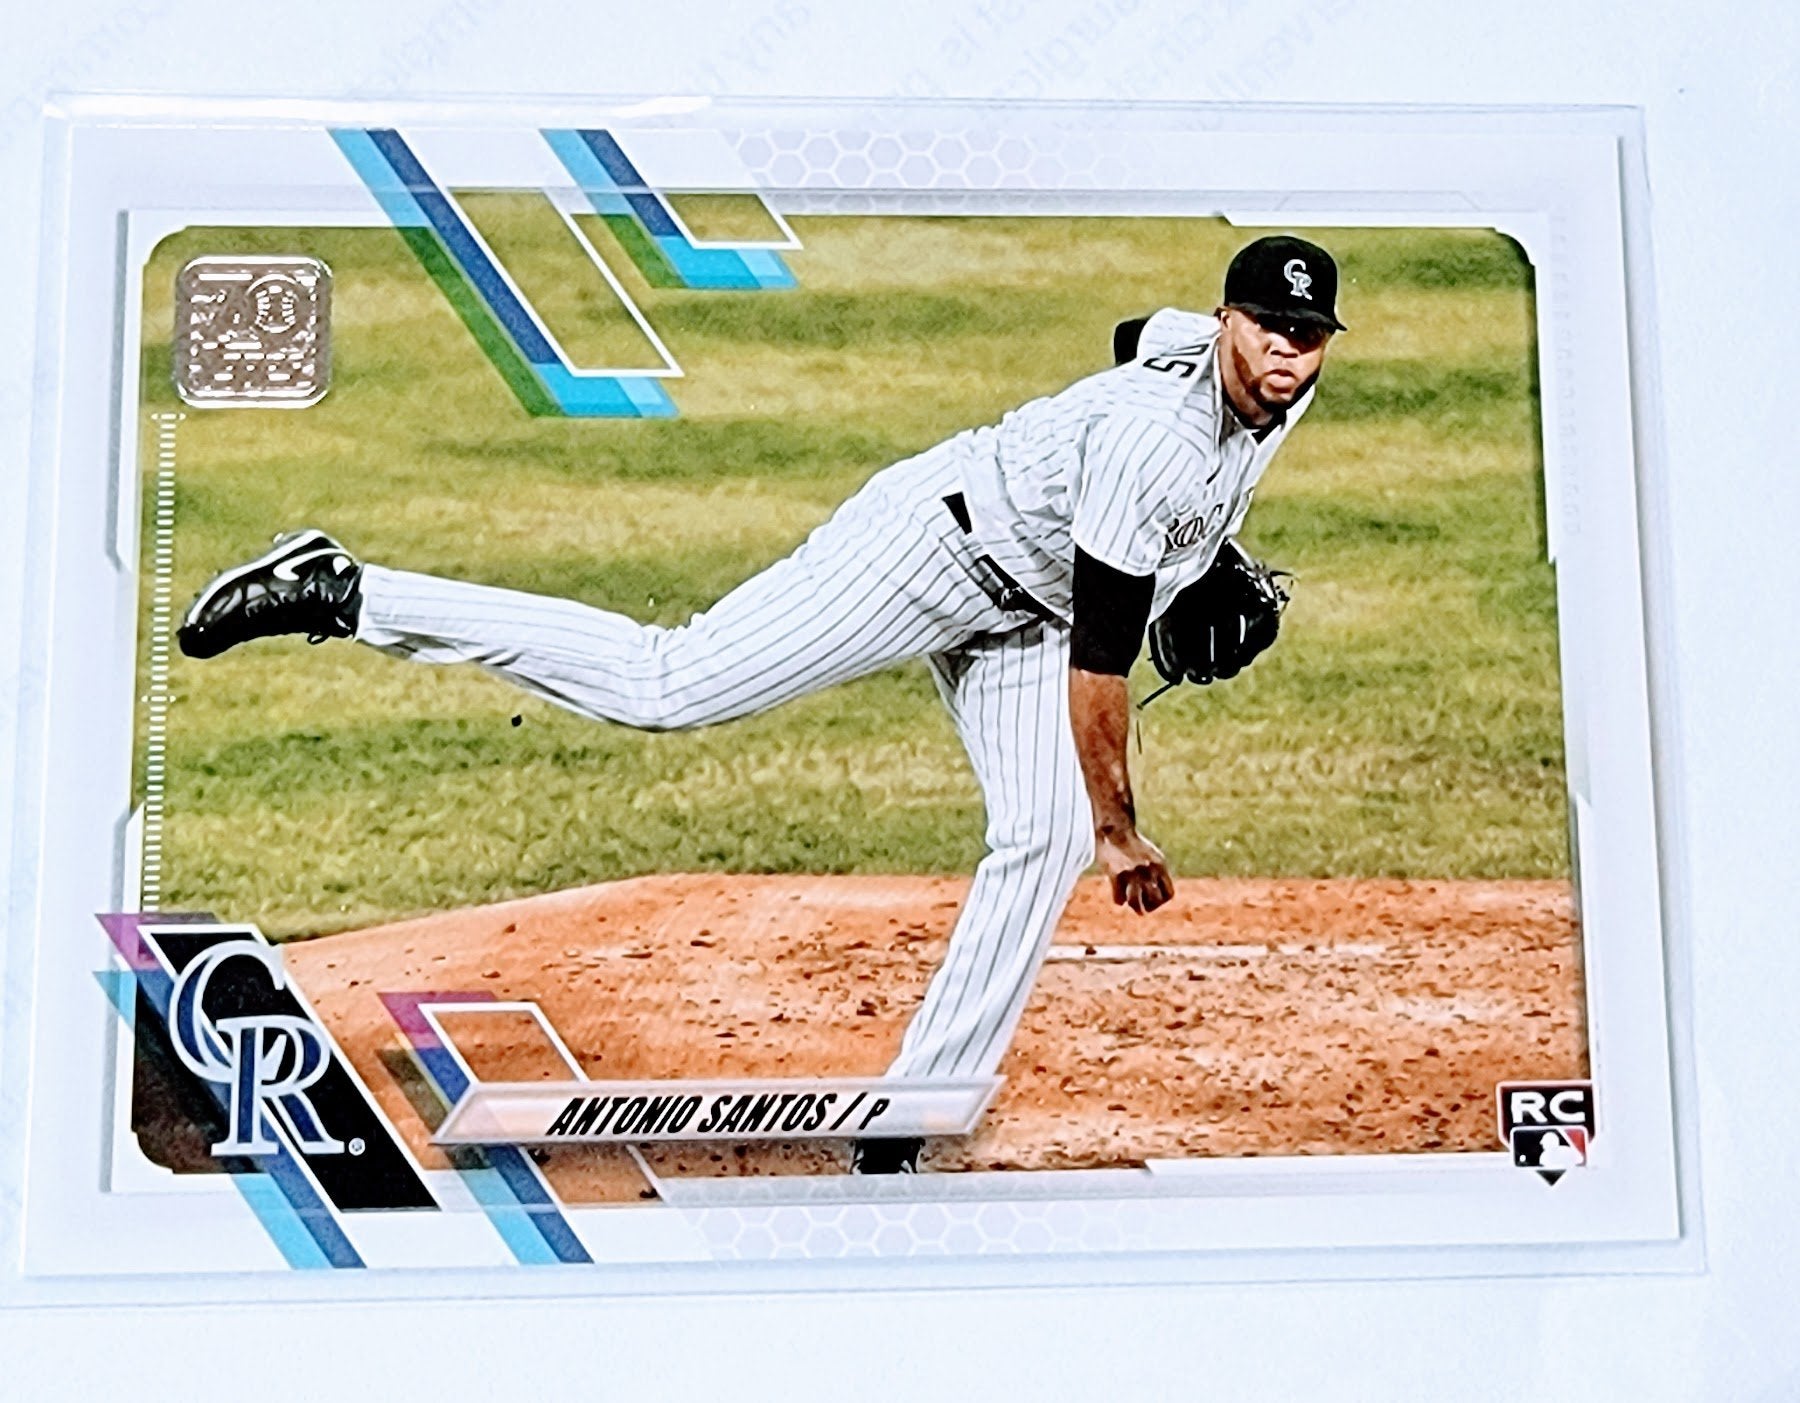 2021 Topps Update Antonio Santos Baseball Trading Card SMCB1 simple Xclusive Collectibles   